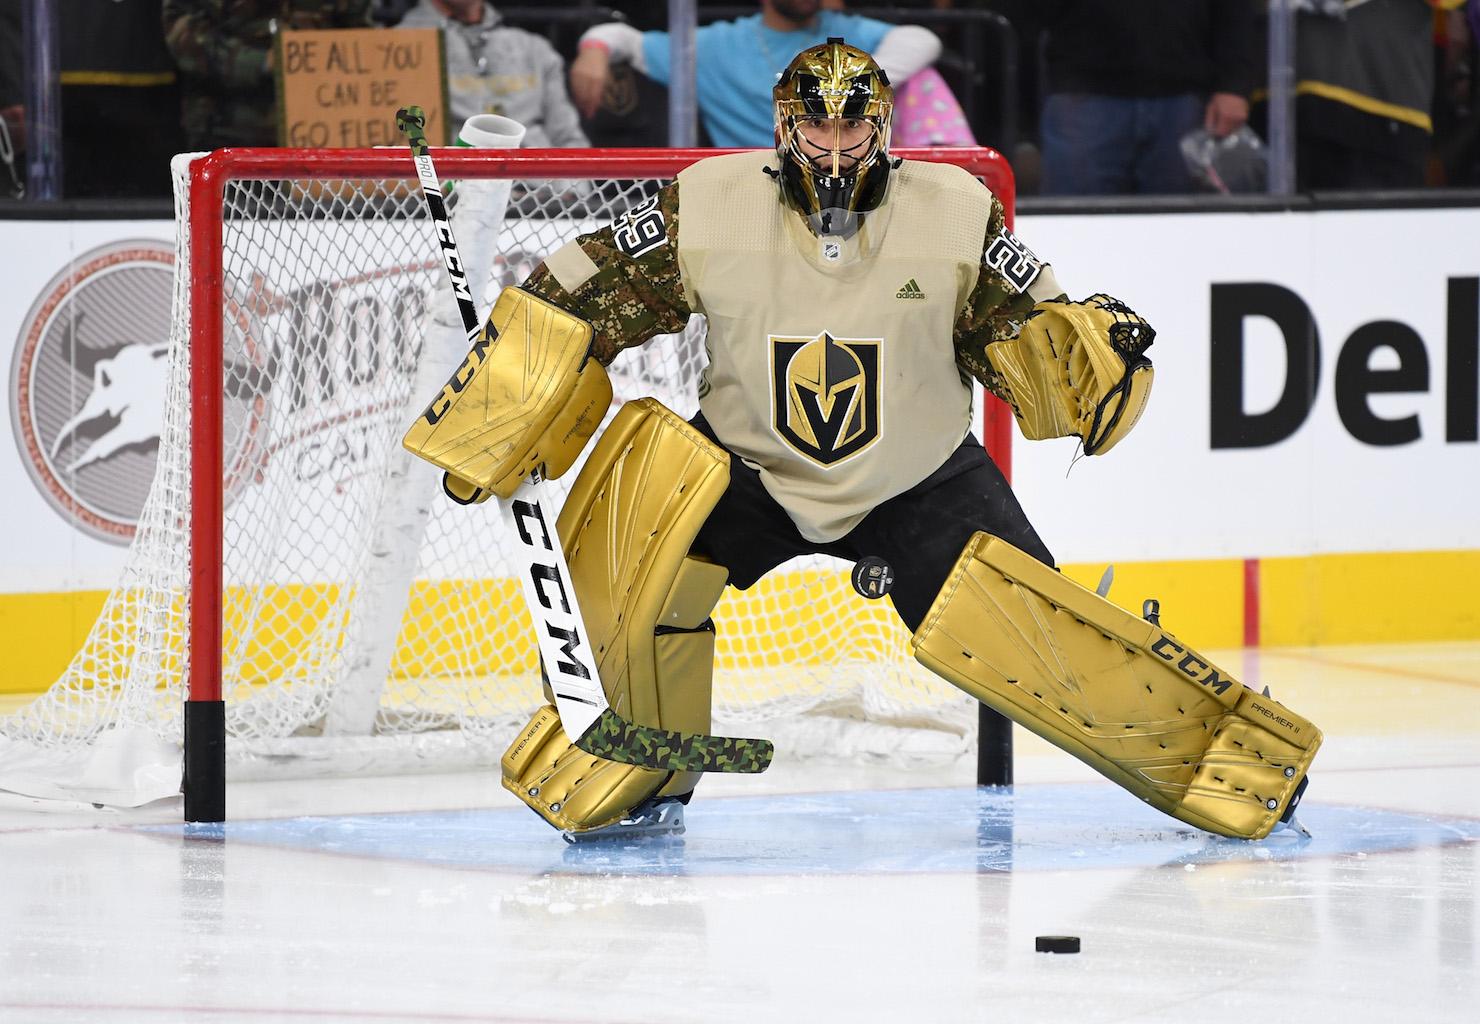 Vegas Golden Knights Goalie Marc Andre Fleury Sports New Gold Pads